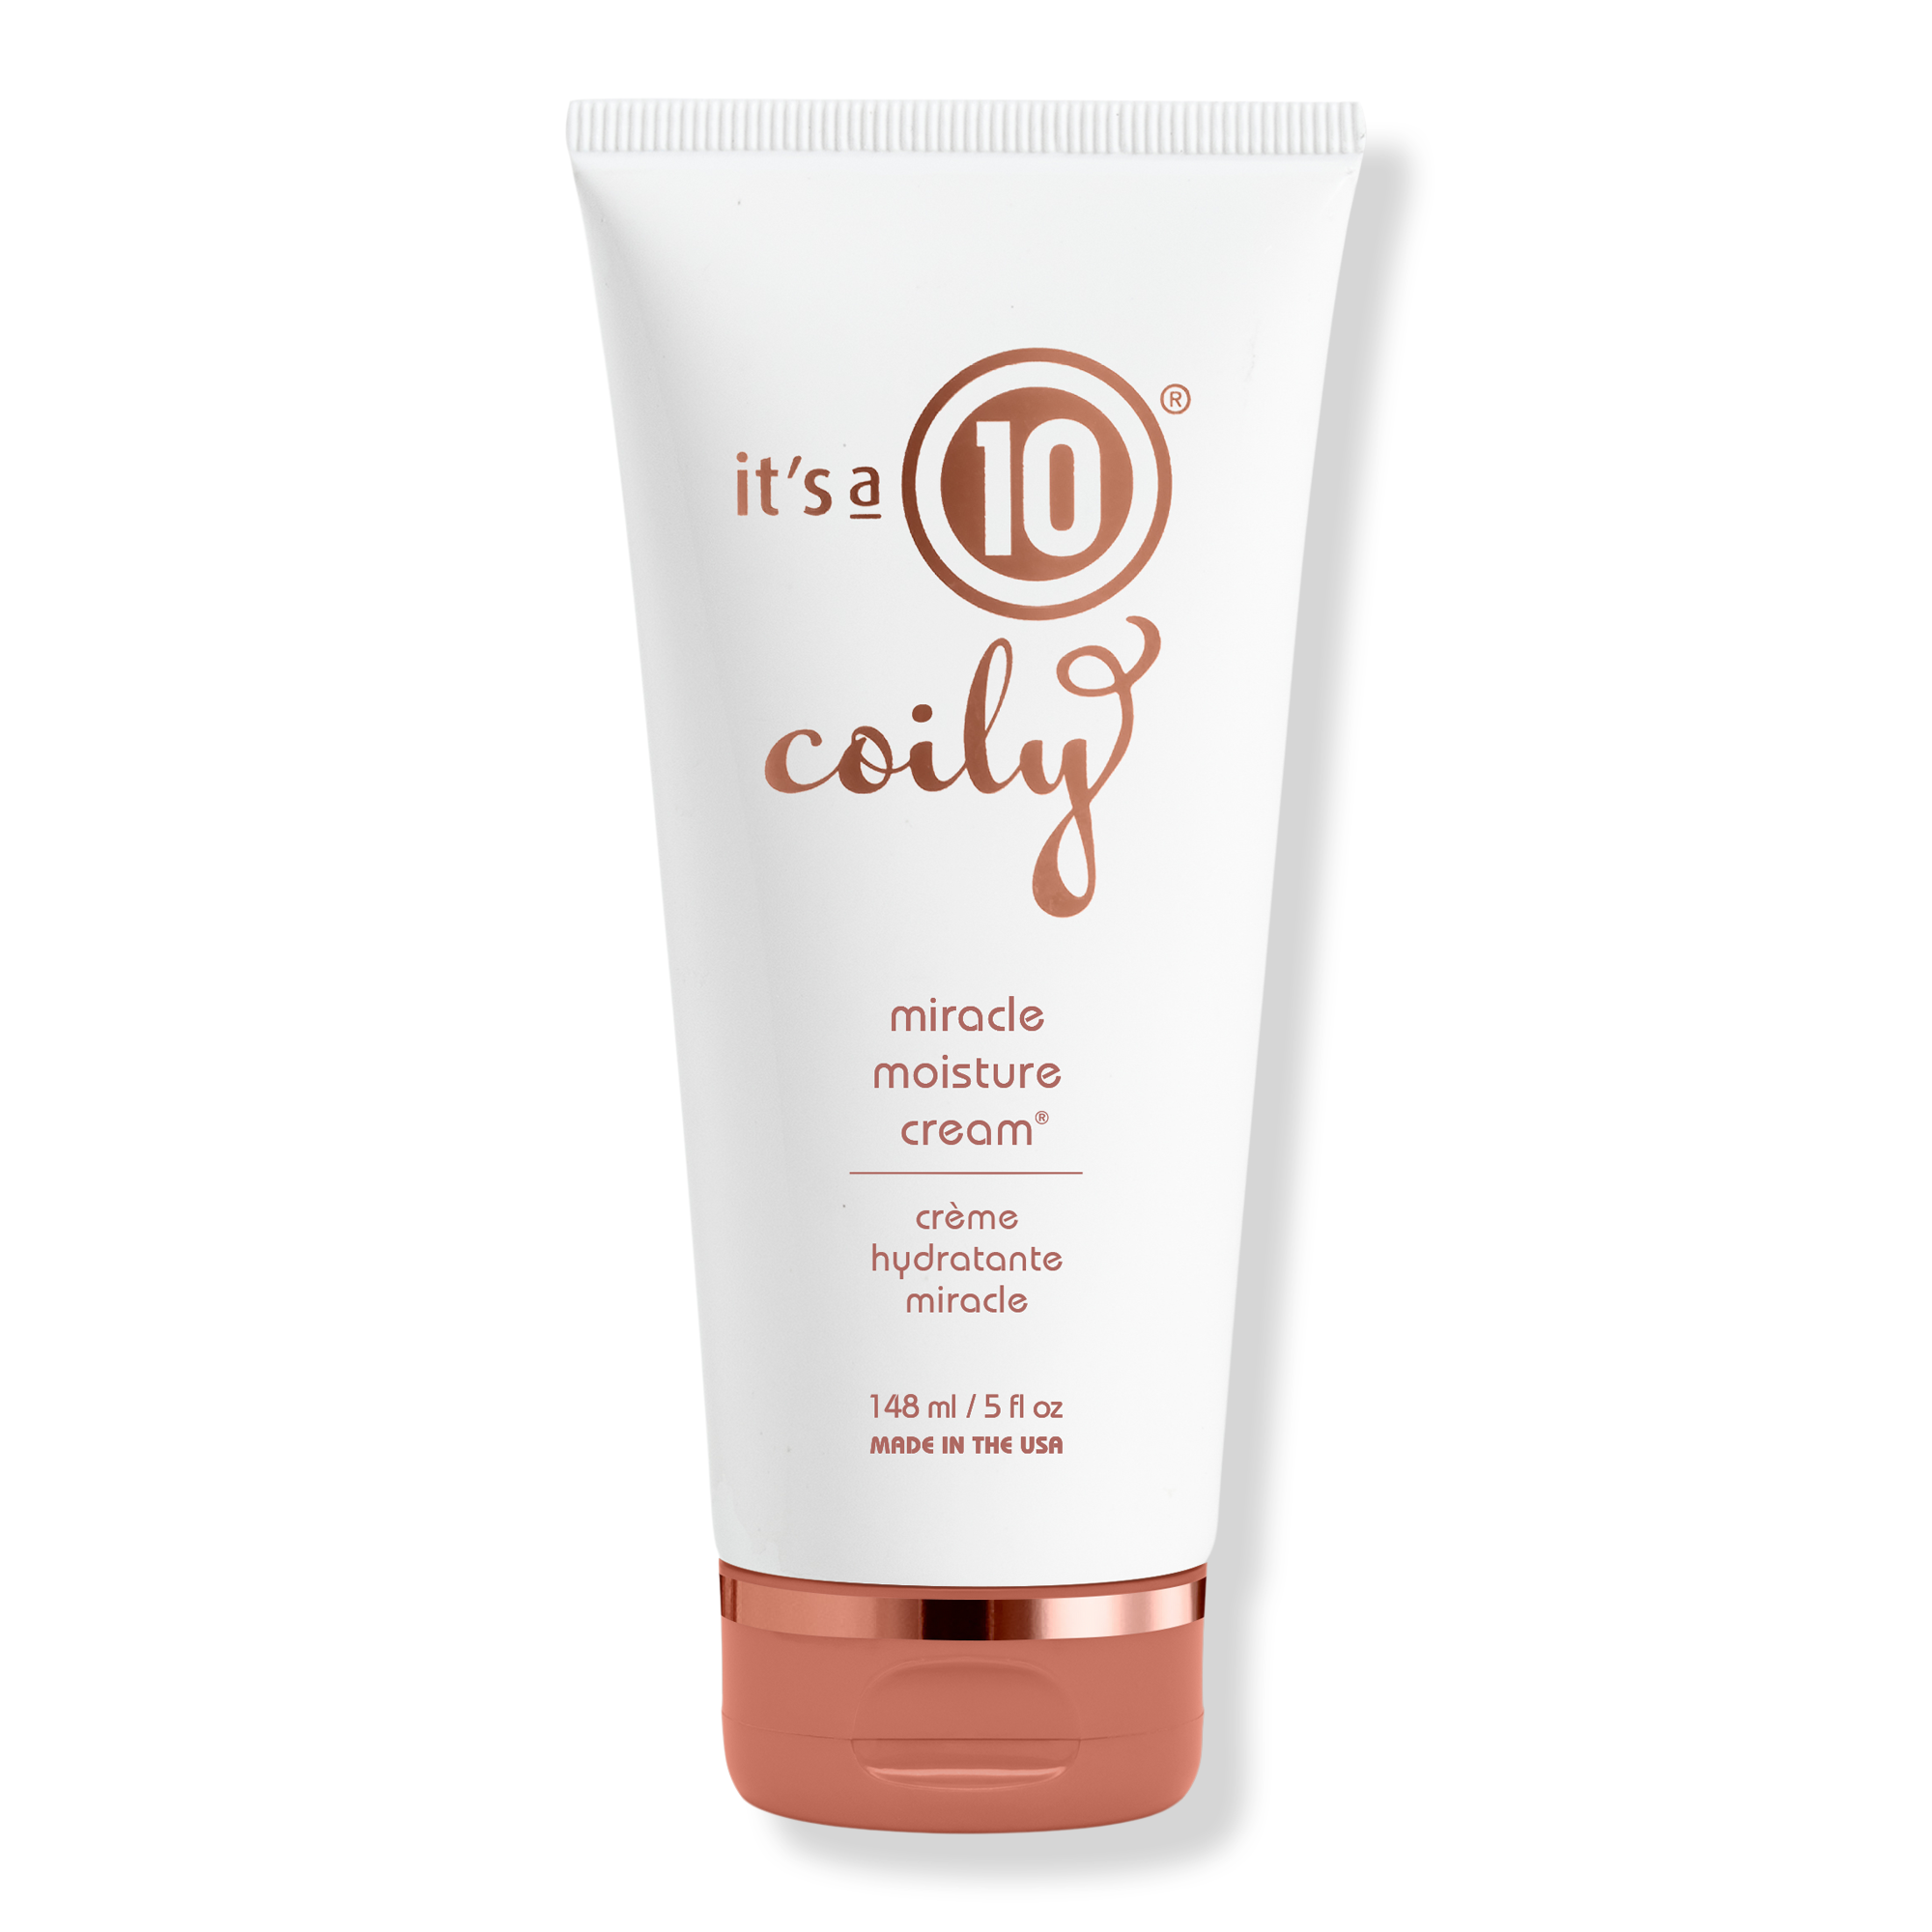 It's a 10 Coily Miracle Moisture Cream / 5OZ